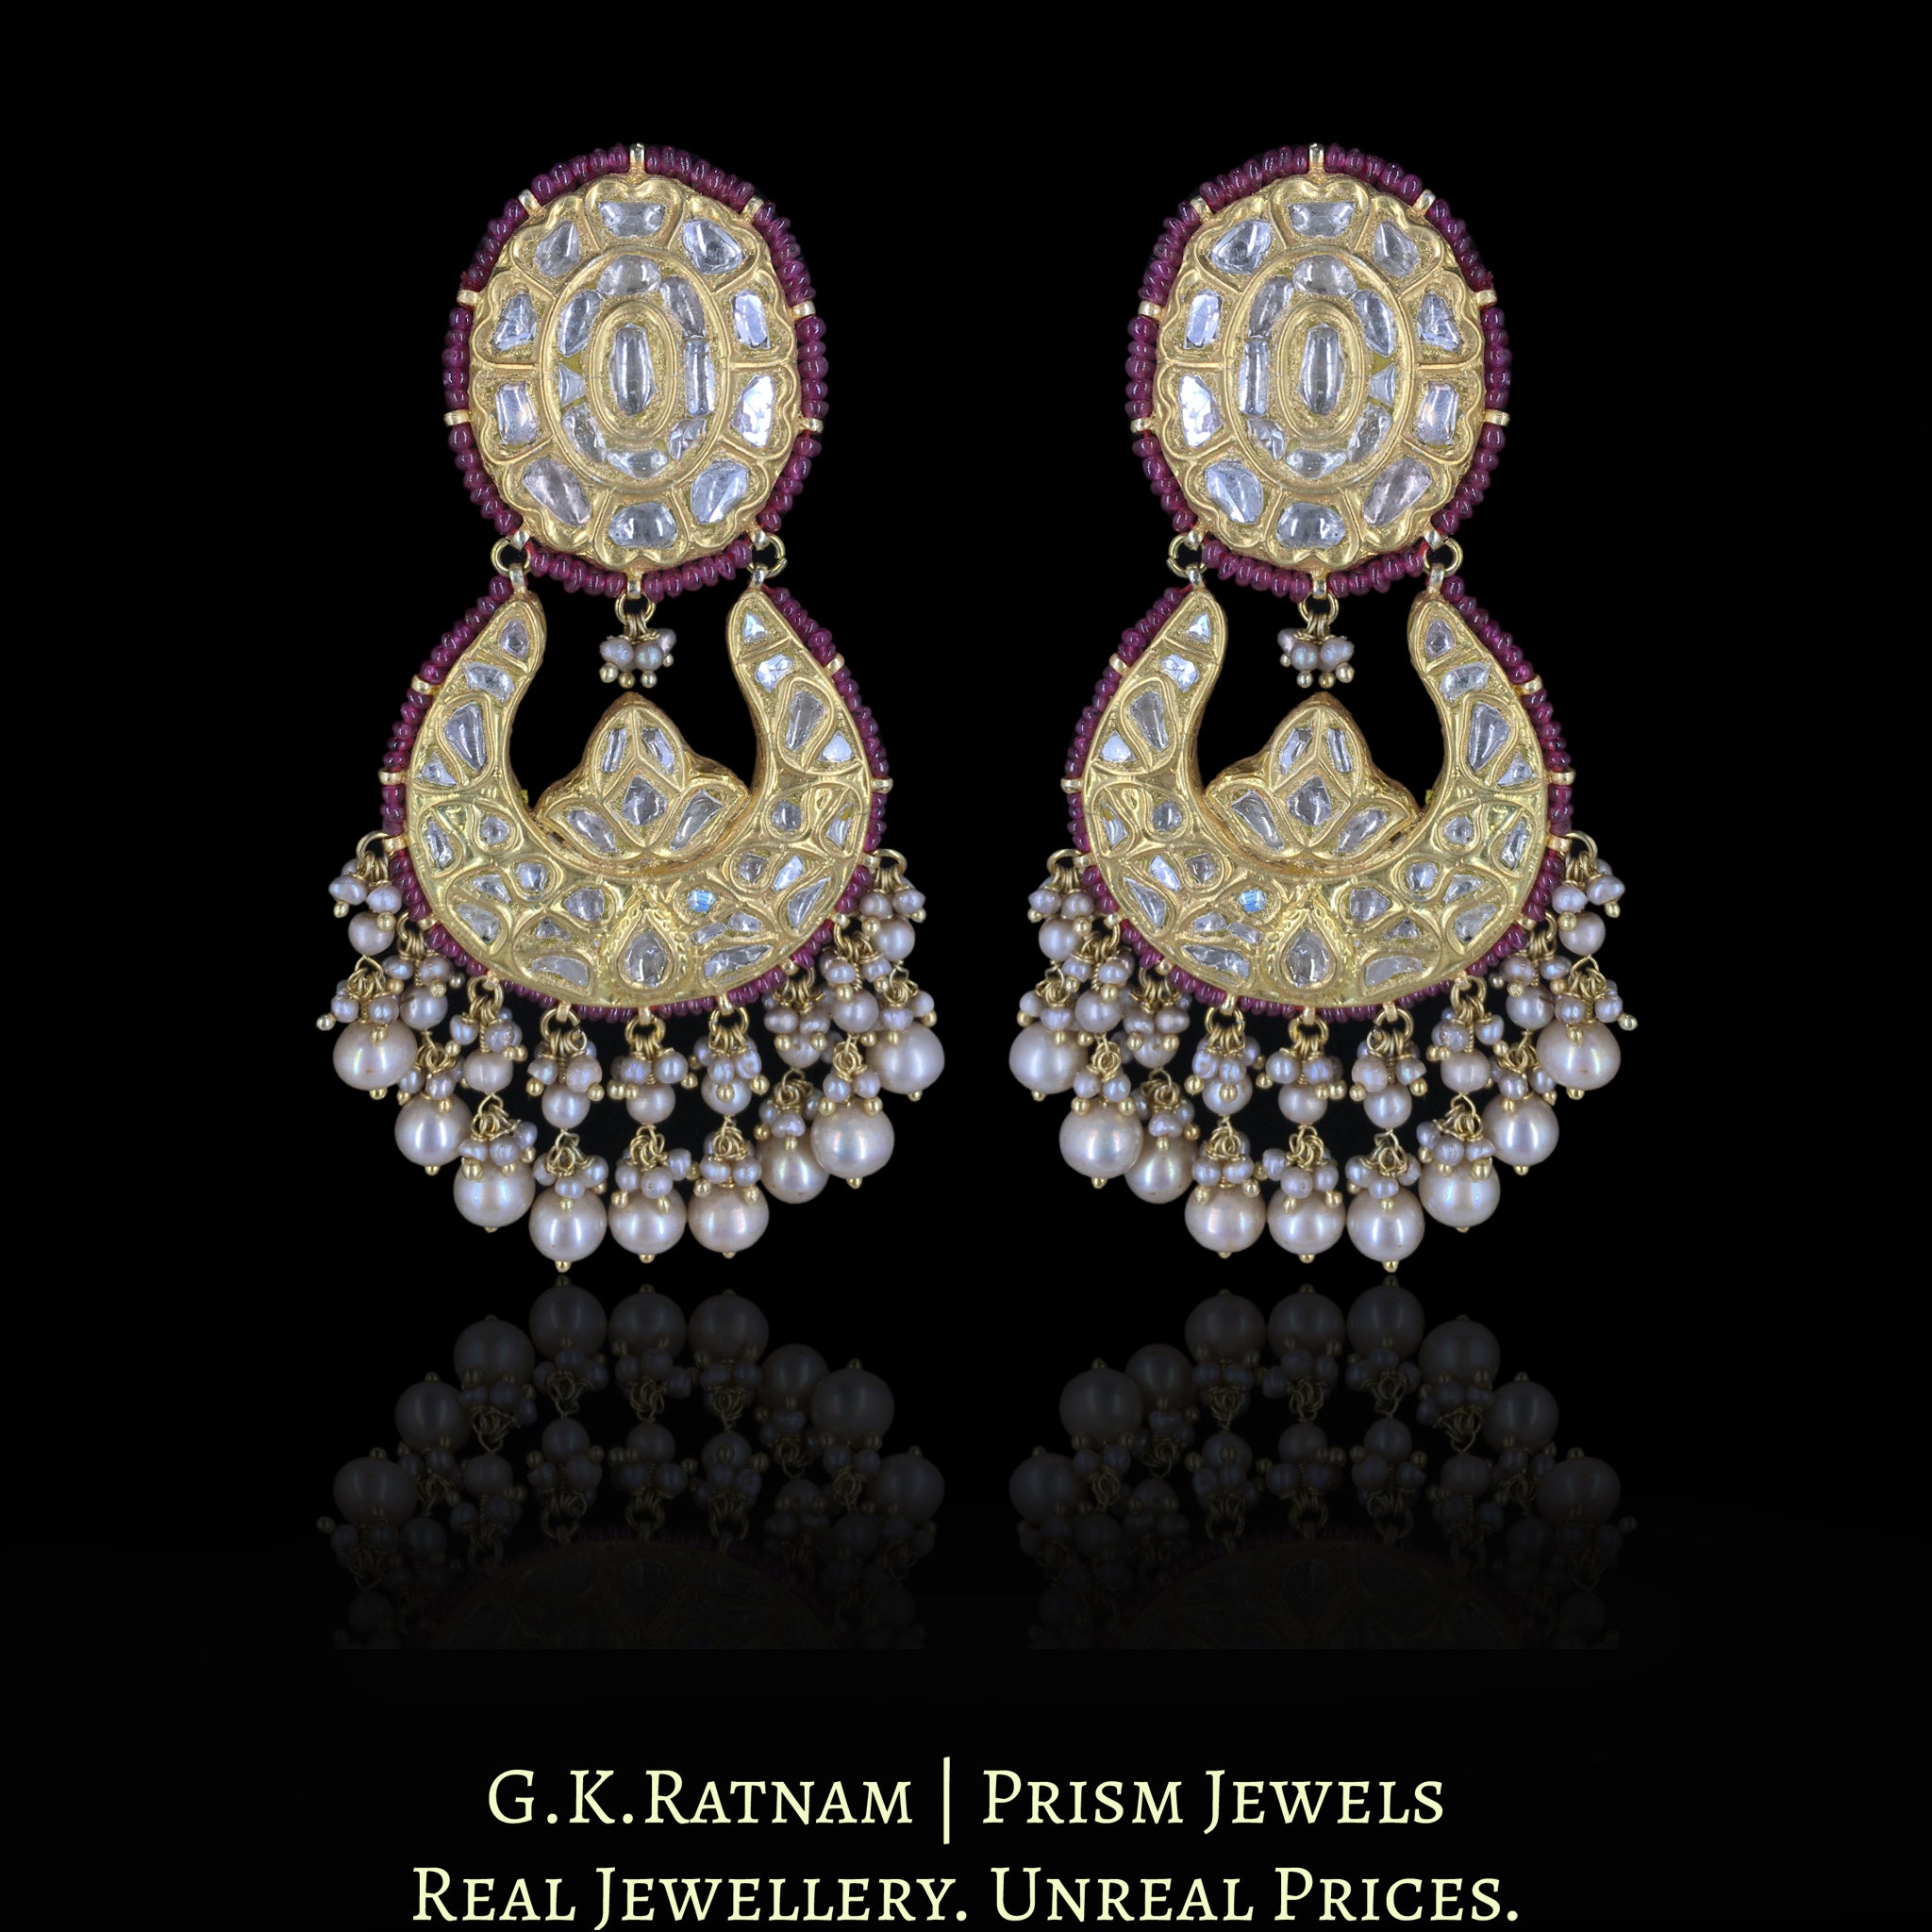 23k Gold and Diamond Polki Chand Bali Earring Pair enhanced with Rubies and Antiqued Hyderabadi Pearls